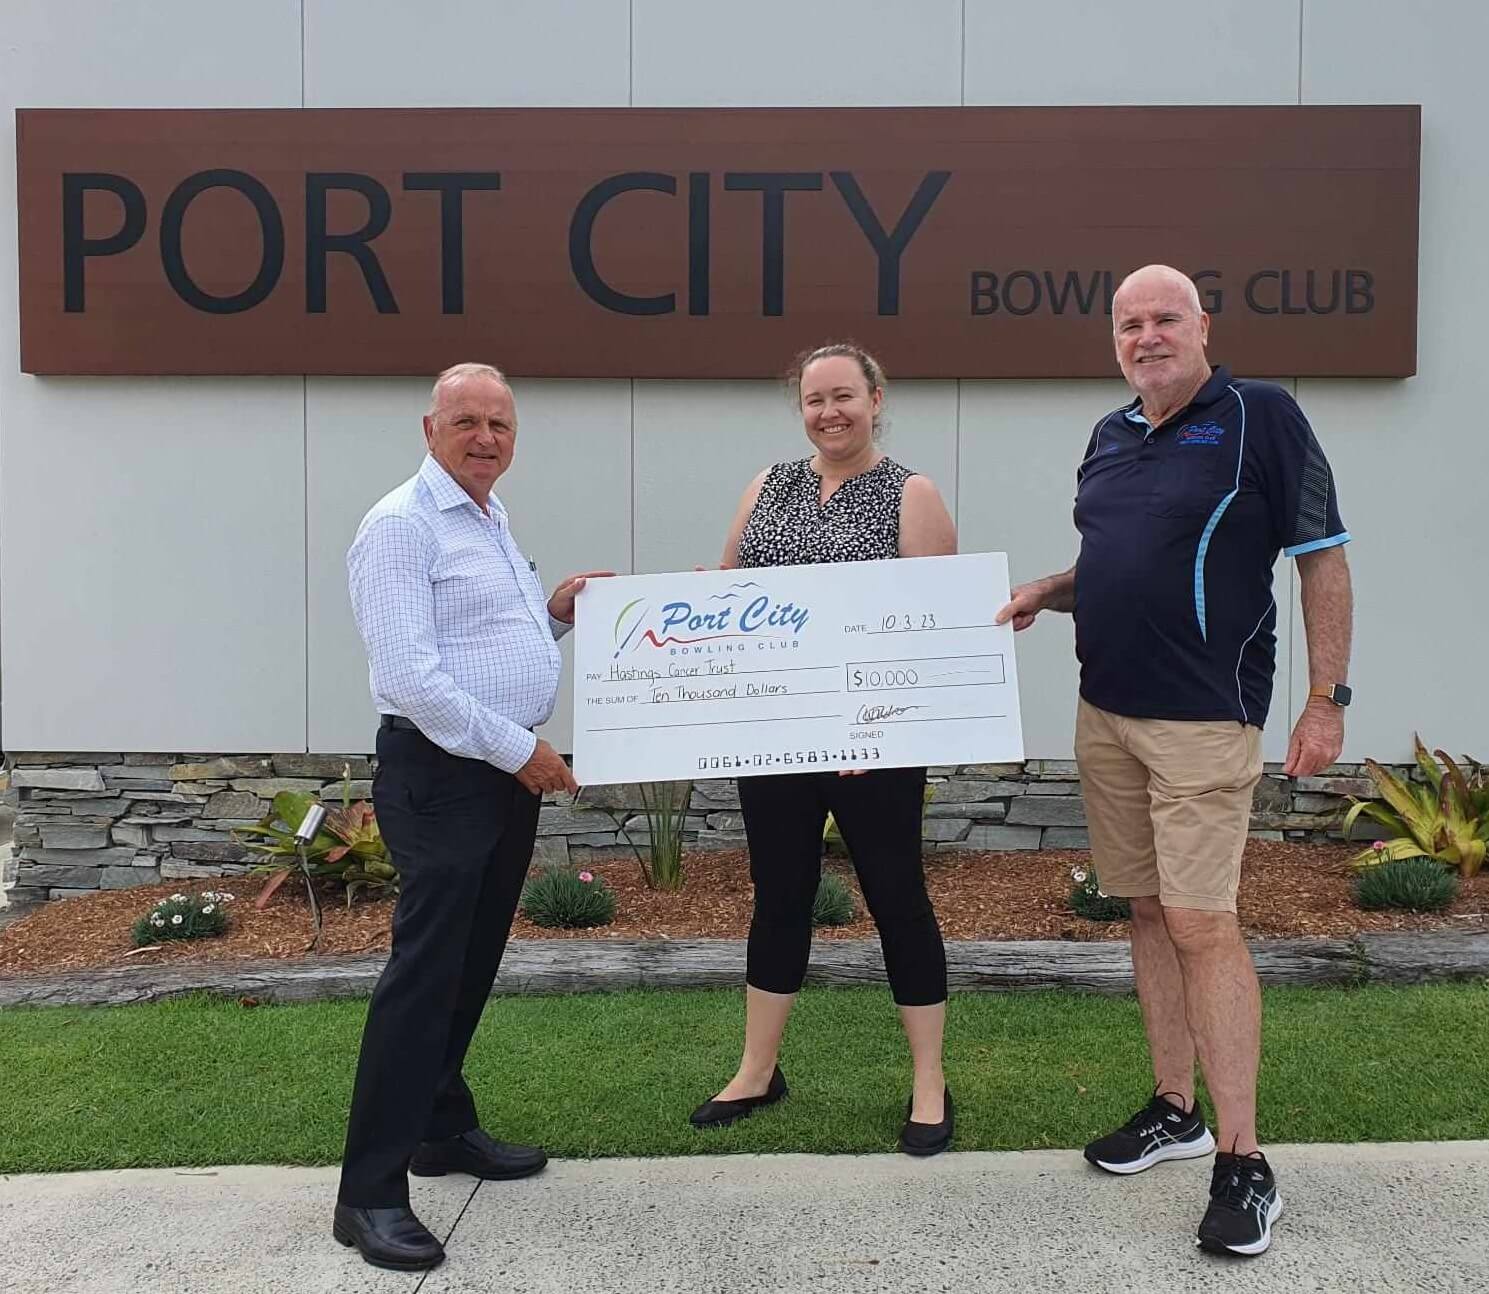 Chris King, Chairman of the Port City Bowling Club and Katy-Lee Waldron presenting a cheque for $10,000 image